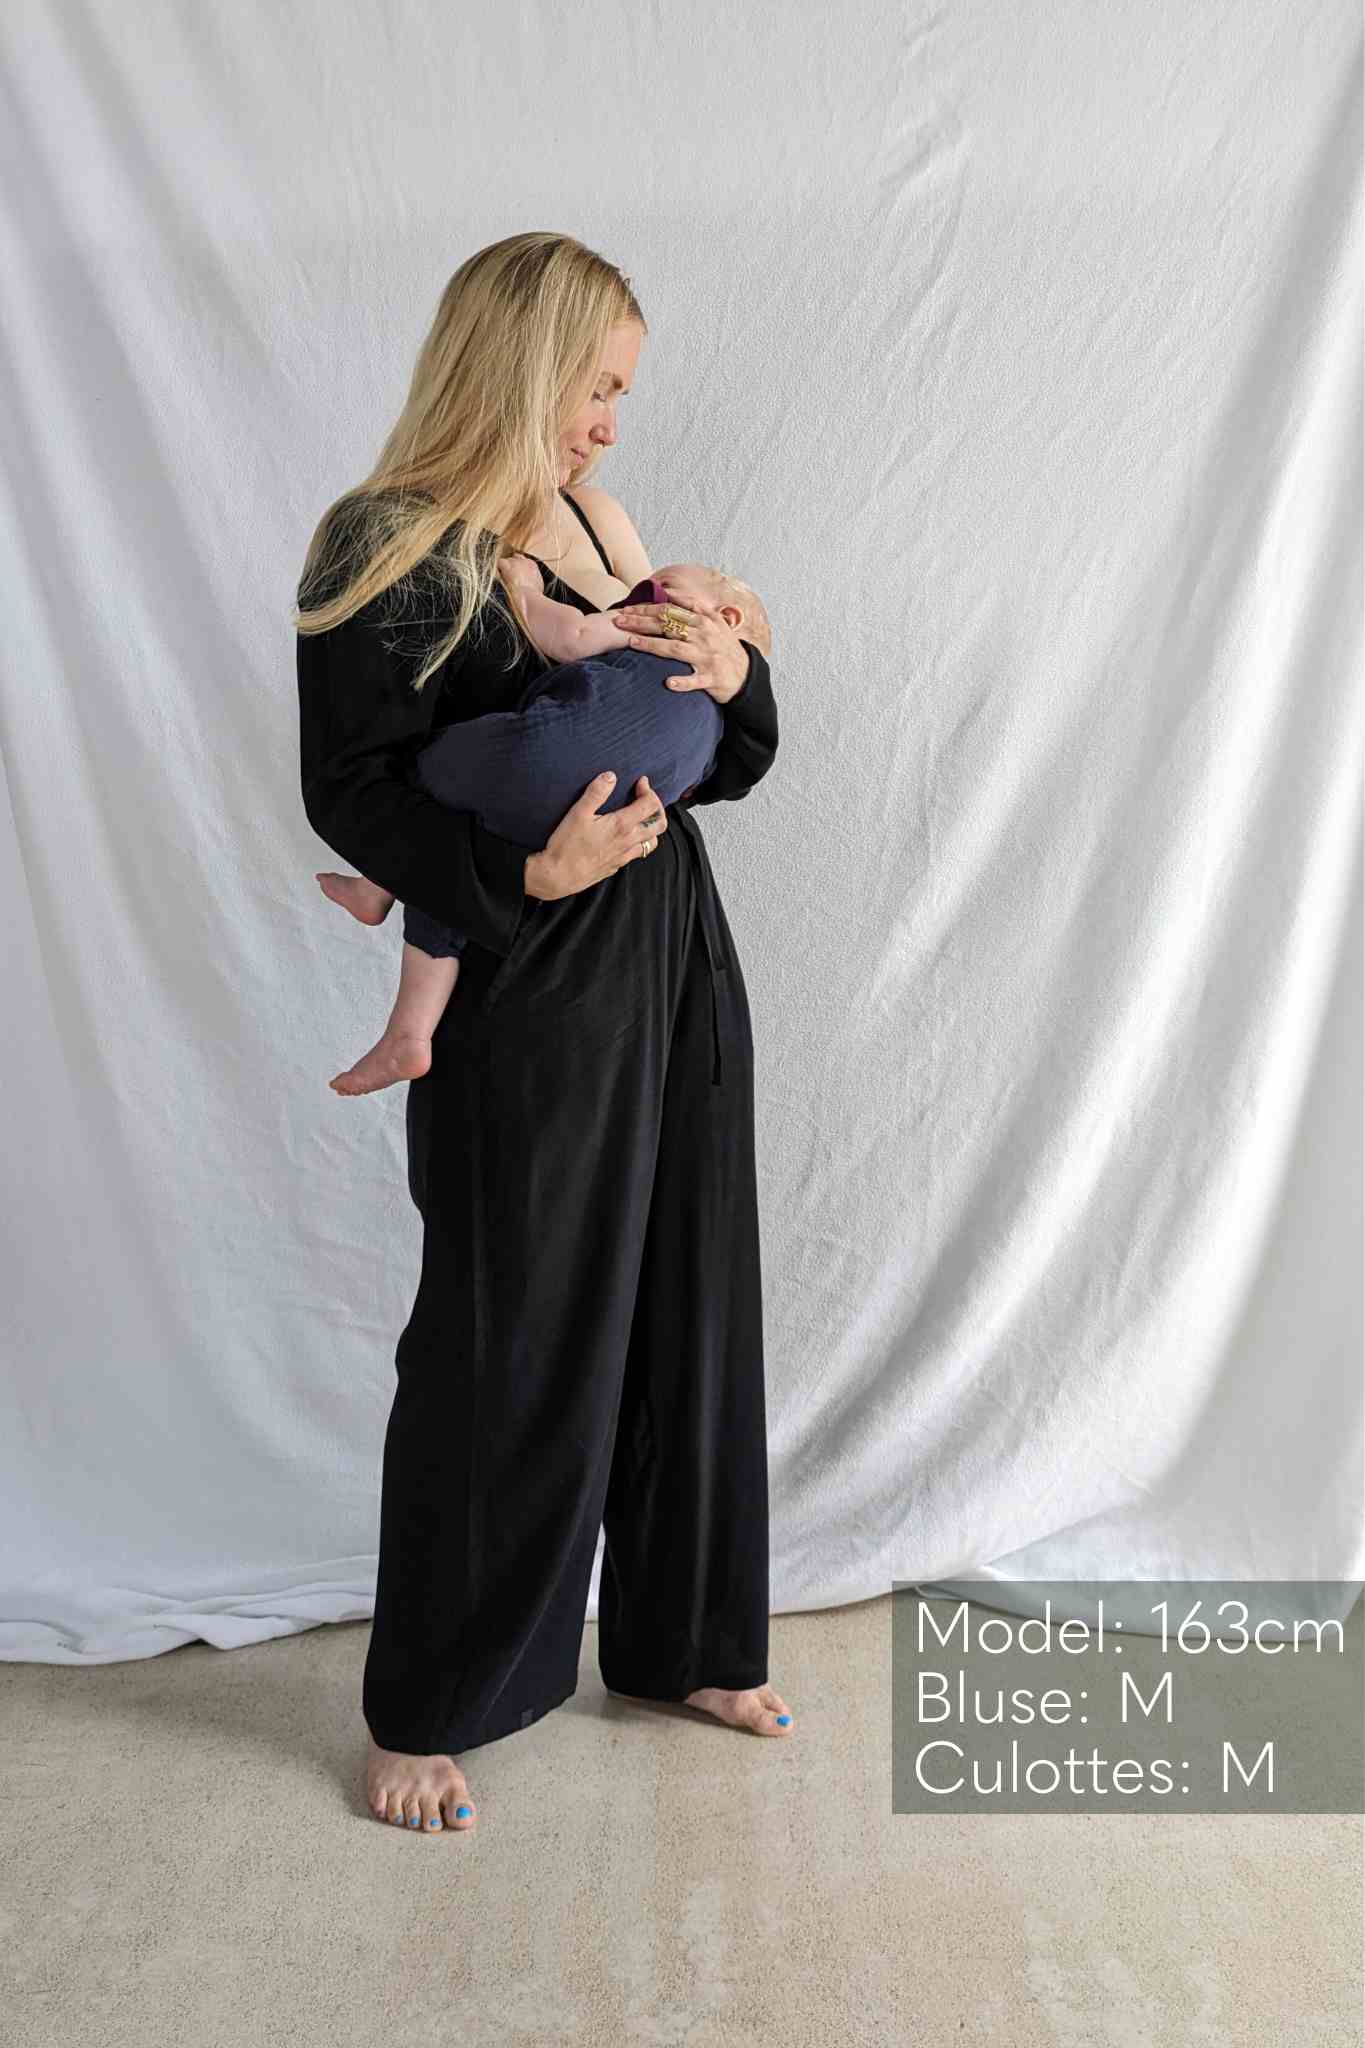 Woman in black blouse and culottes carries baby in her arms.